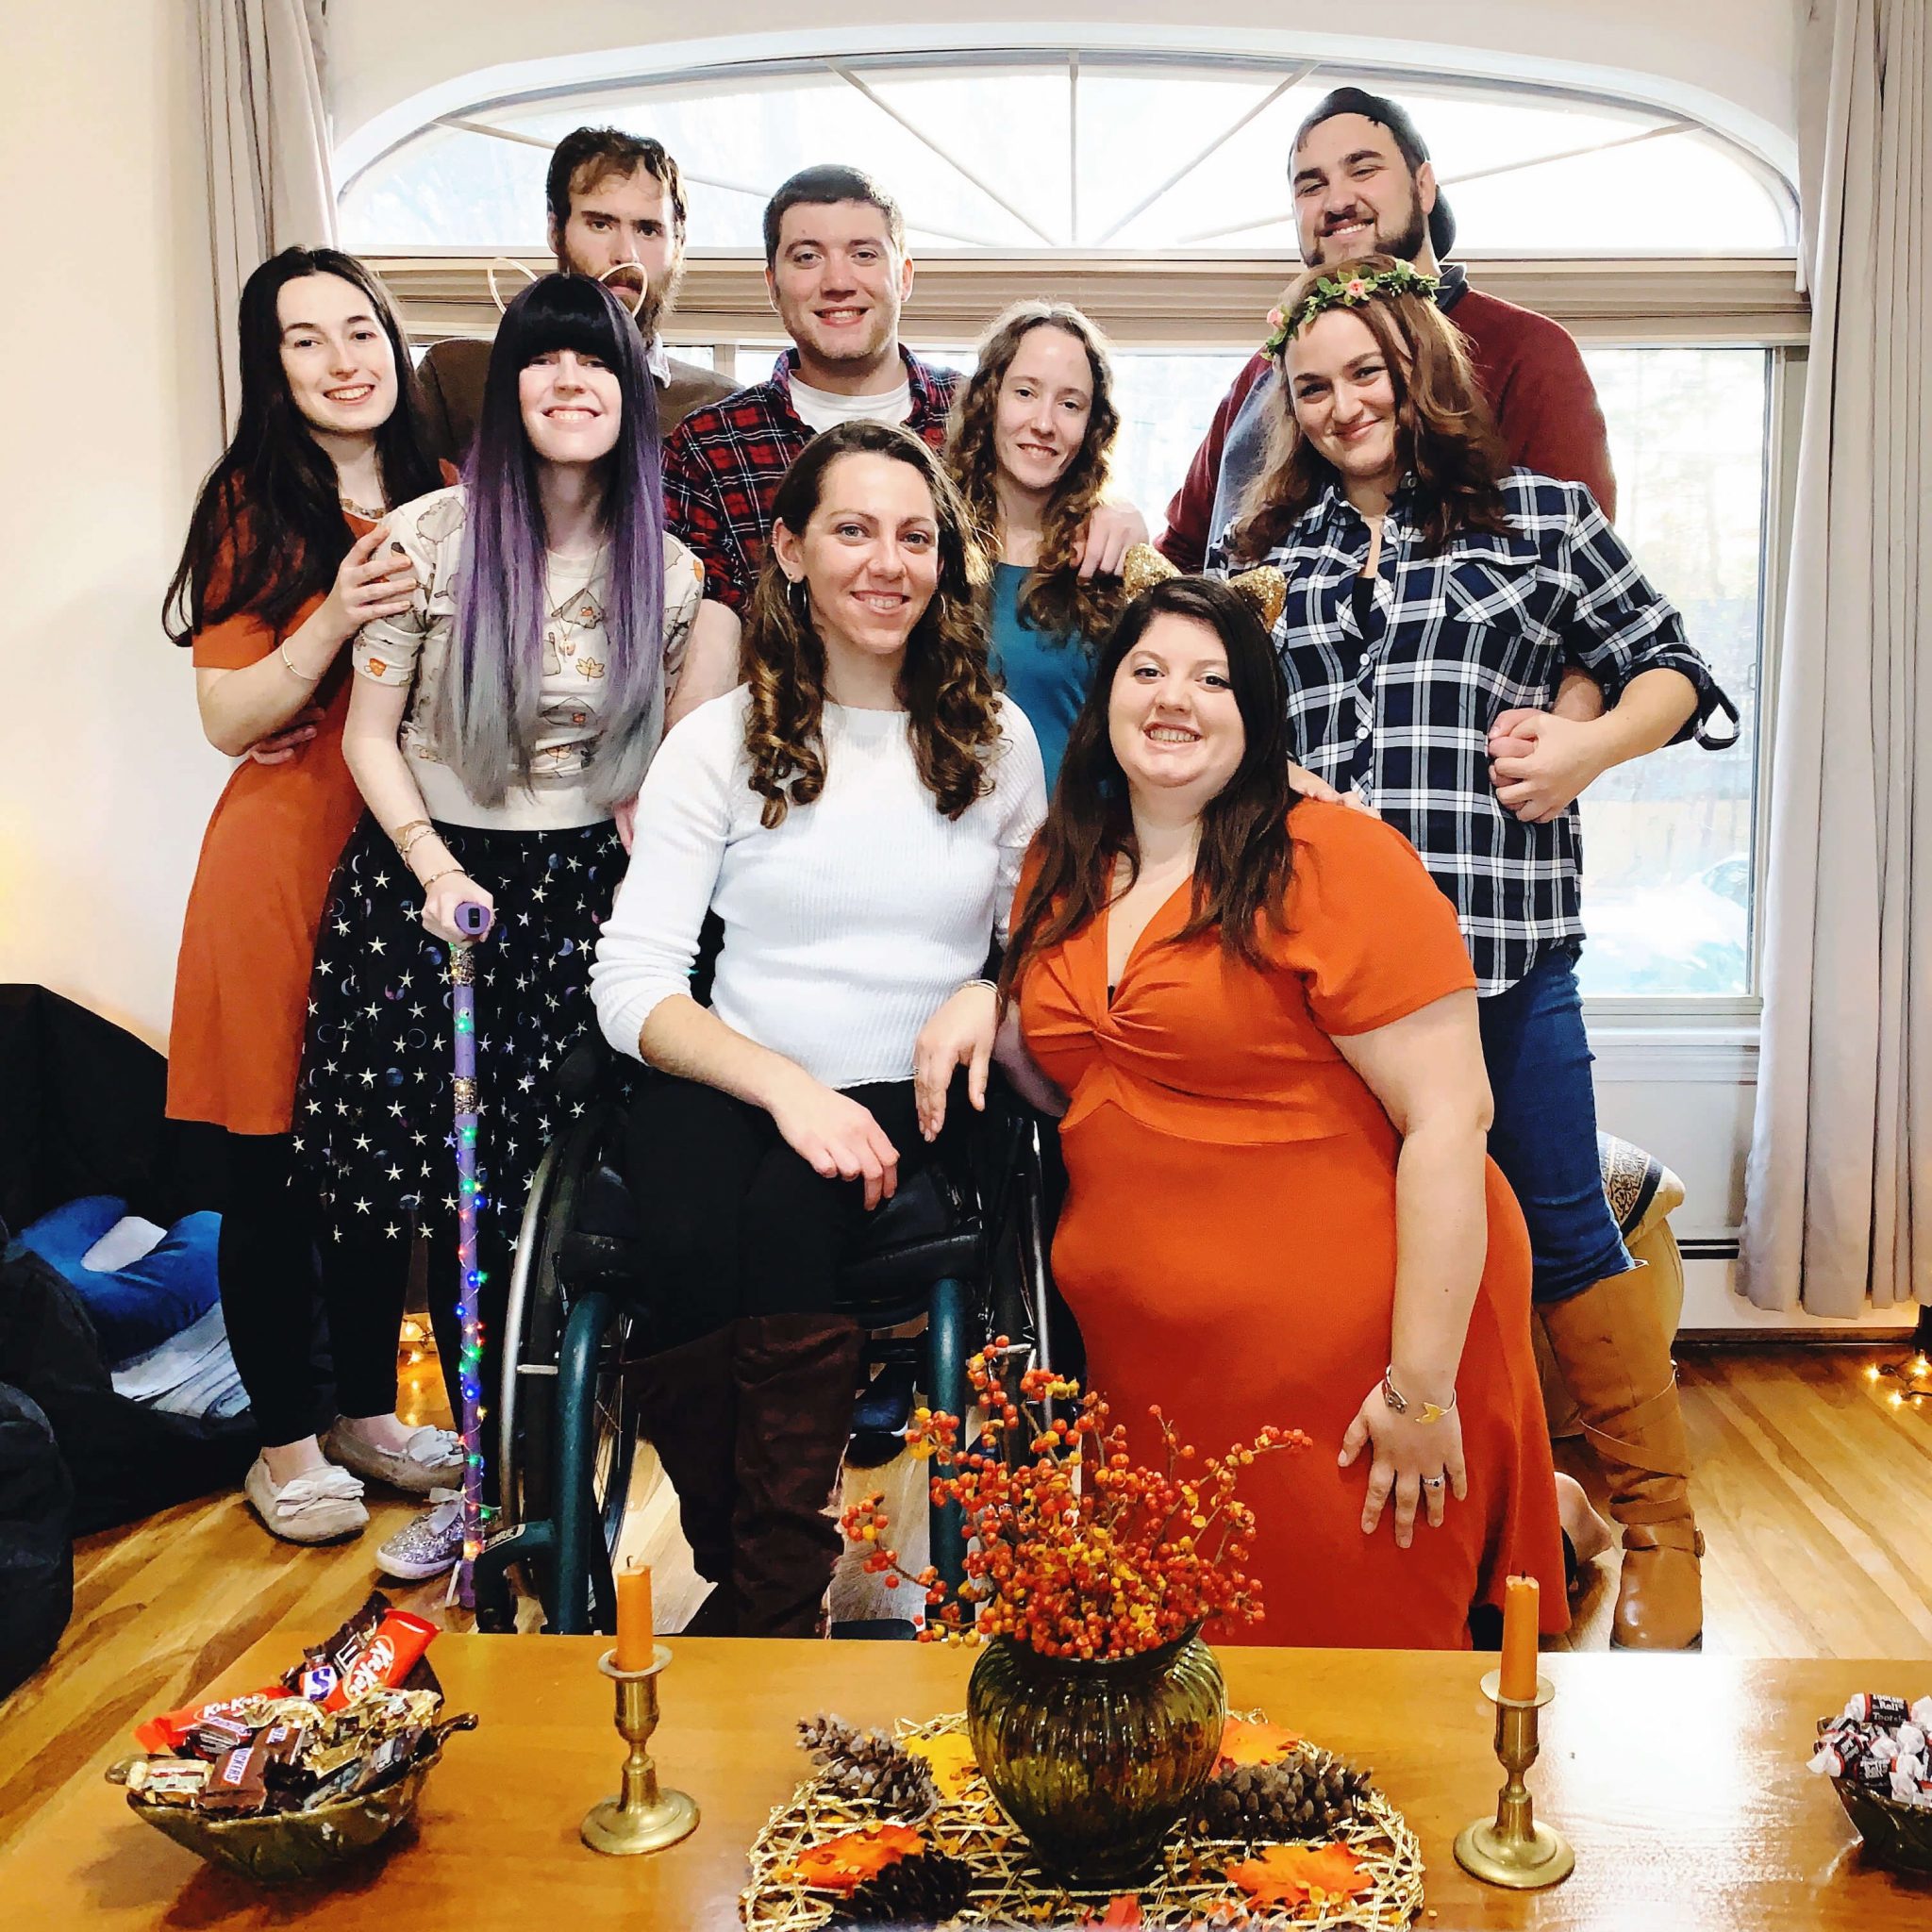 The writer is posing with her group of friends for Friendsgiving inside a home with a large window behind everyone. In front, there is a small table with centerpieces and fall-inspired decor, including orange candlesticks. Several people are wearing fall attire, including two orange dresses, a few flannel shirts, a flower crown, a fall sweater with leaves on it, and a purple walking cane decorated with rainbow holiday lights. Everyone is smiling.